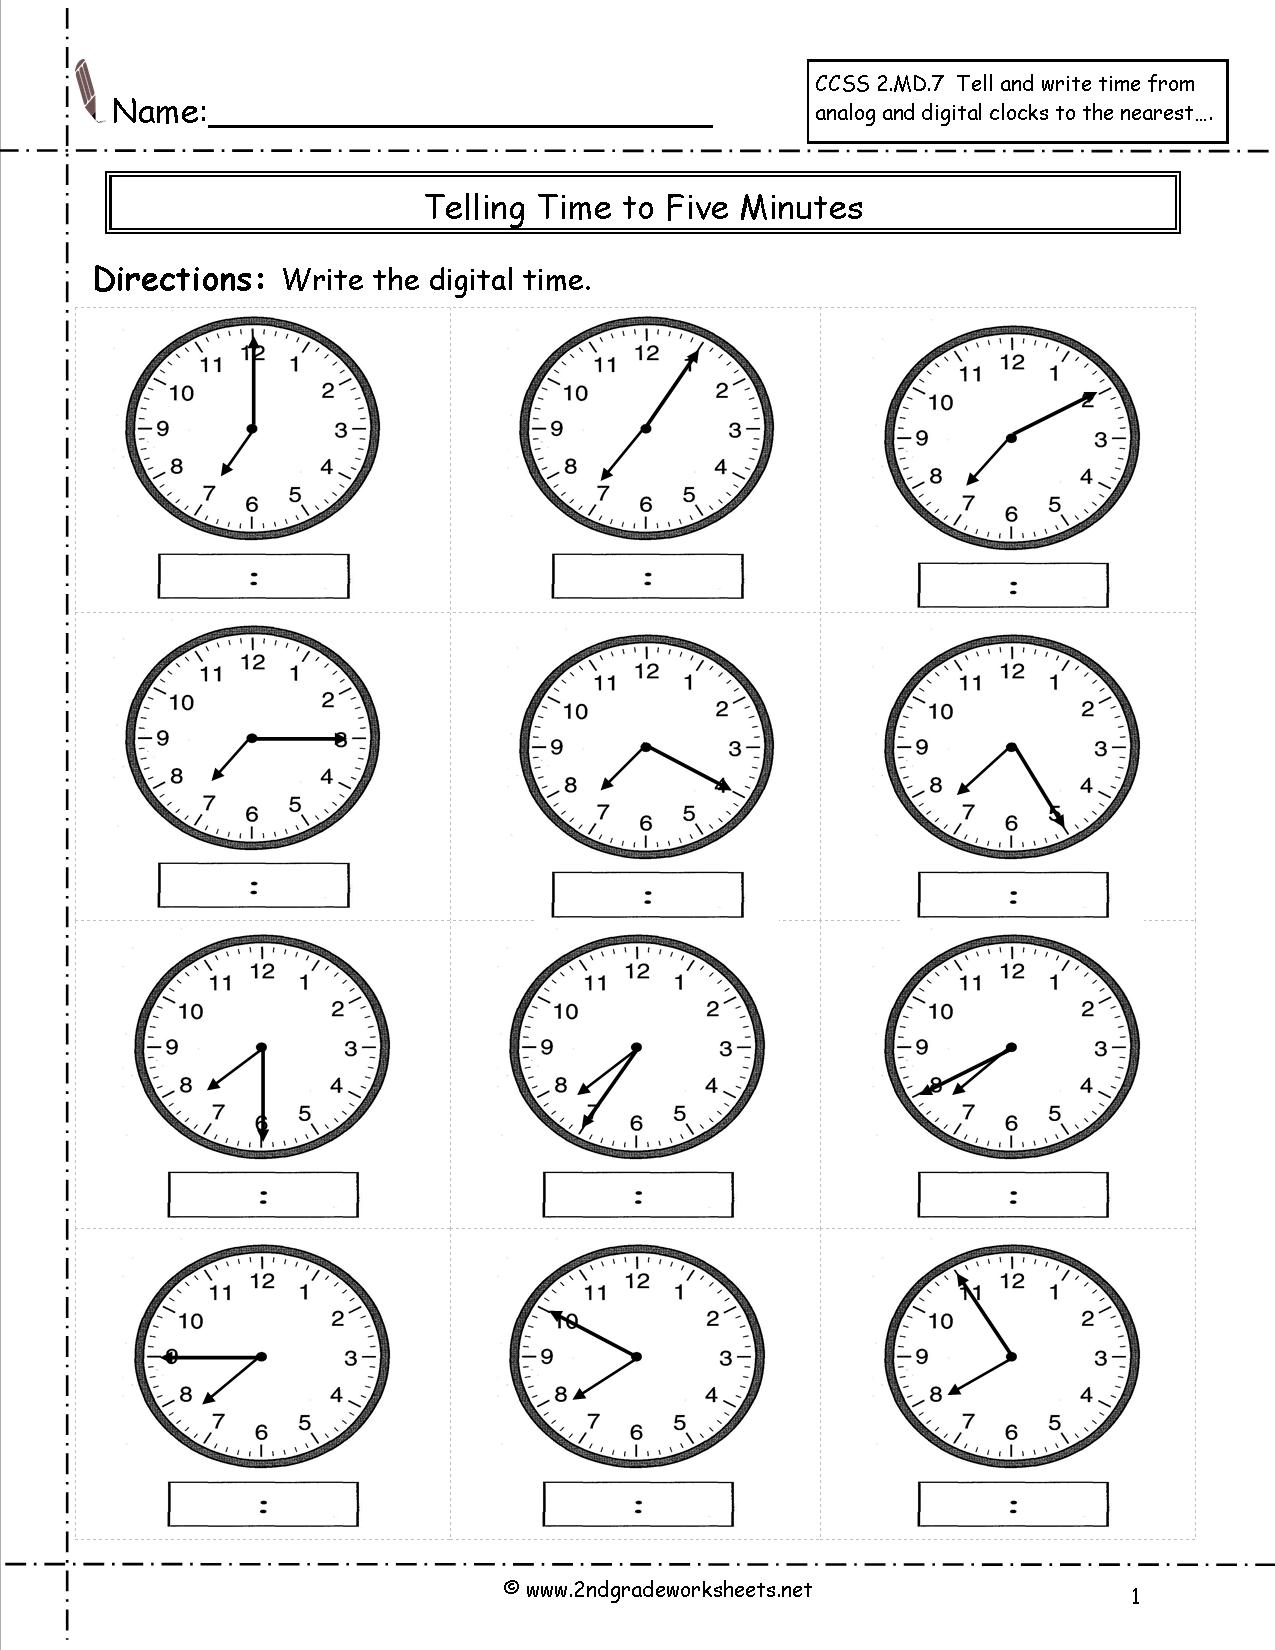 18 Best Images of Elapsed Time Worksheets For 3rd Grade ...